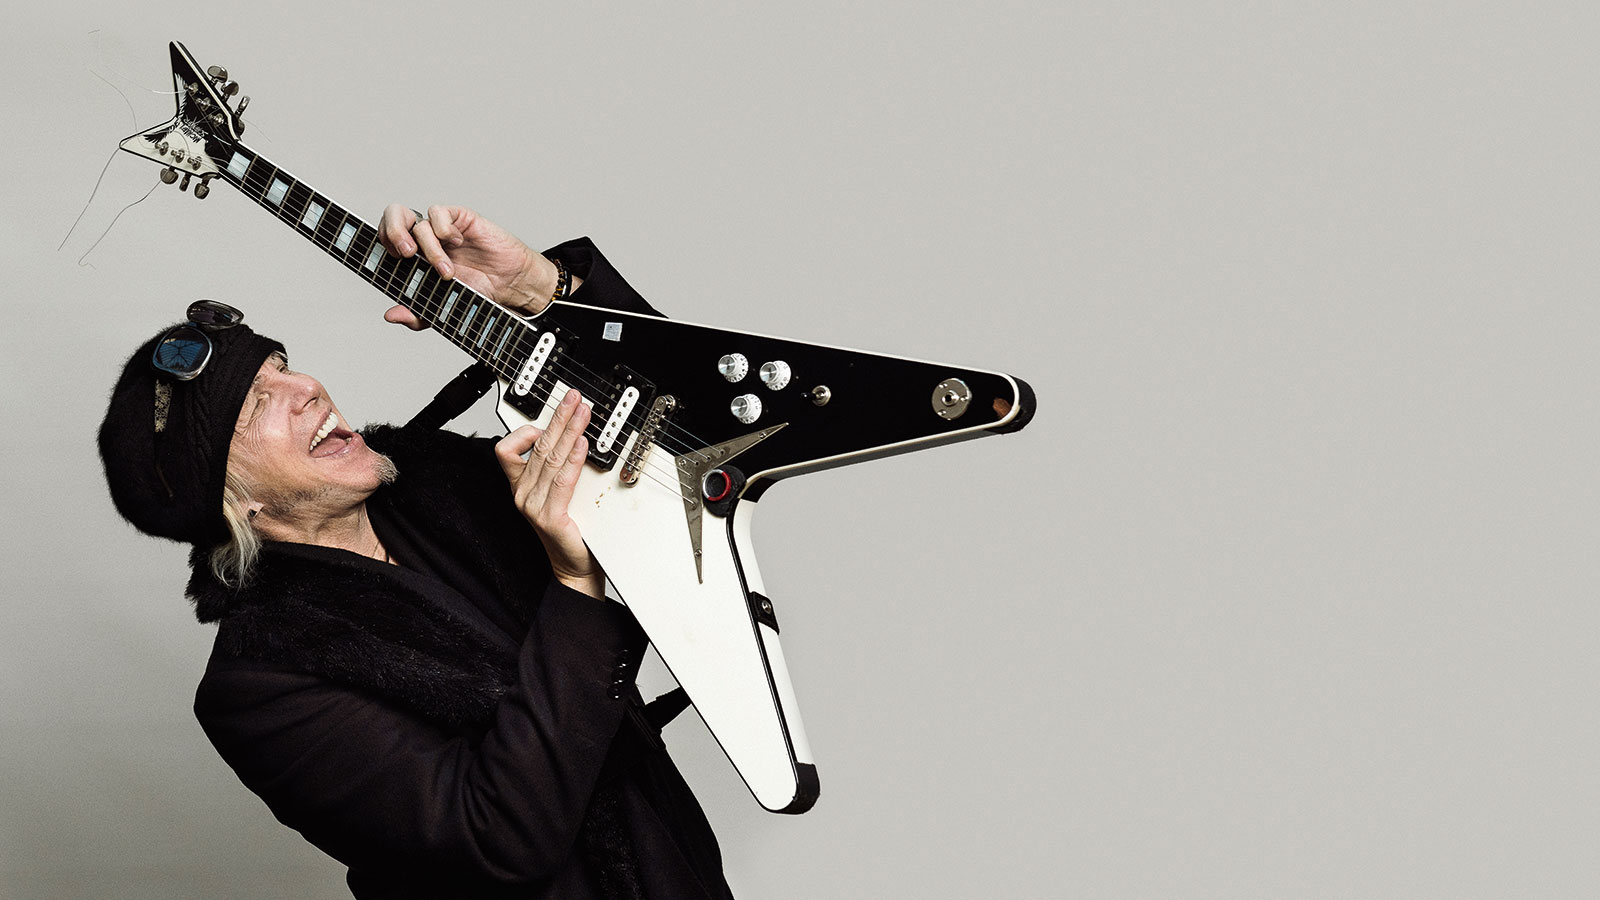 Michael Schenker's 10 tips for guitarists: The key is making each note carry a meaning